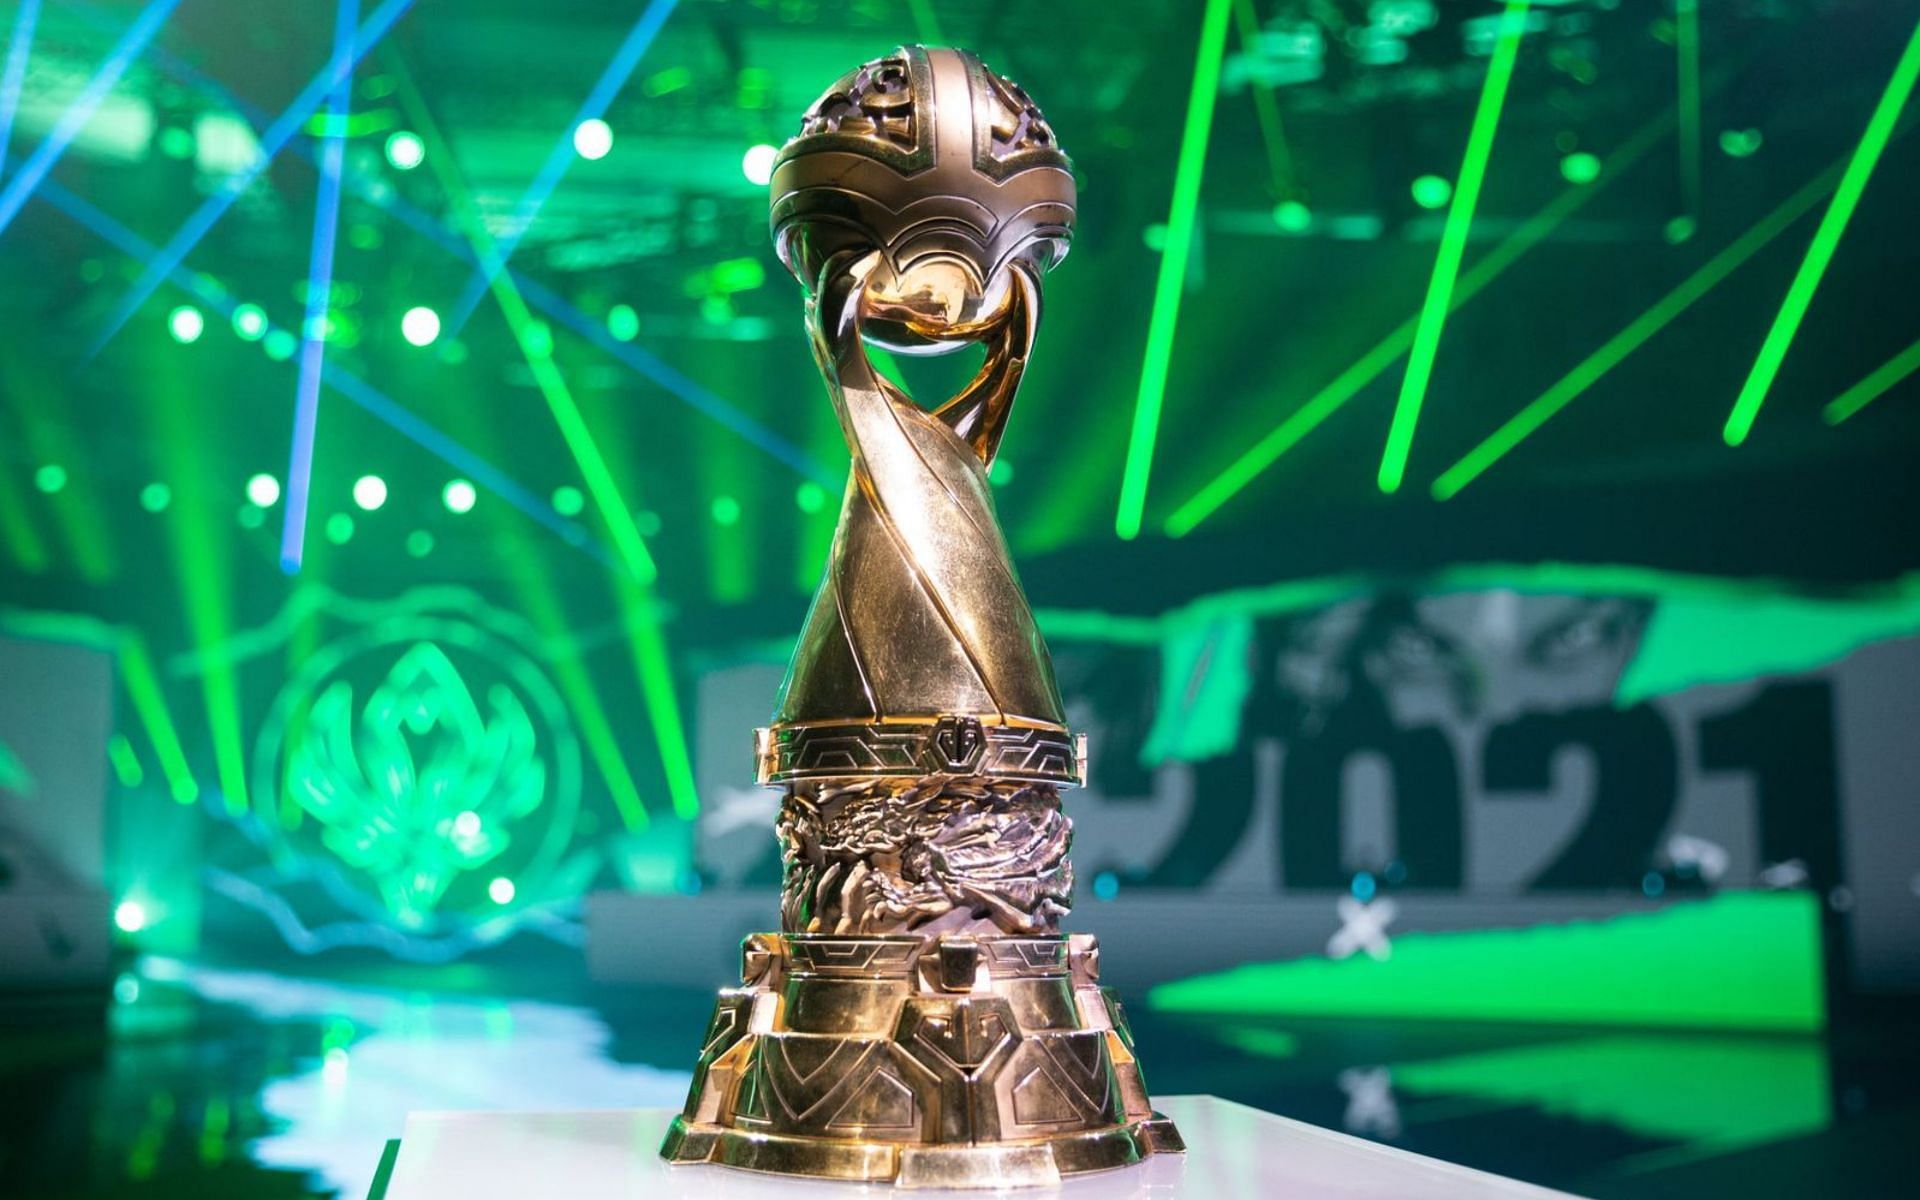 The MSI champions trophy (Image via Riot Games)